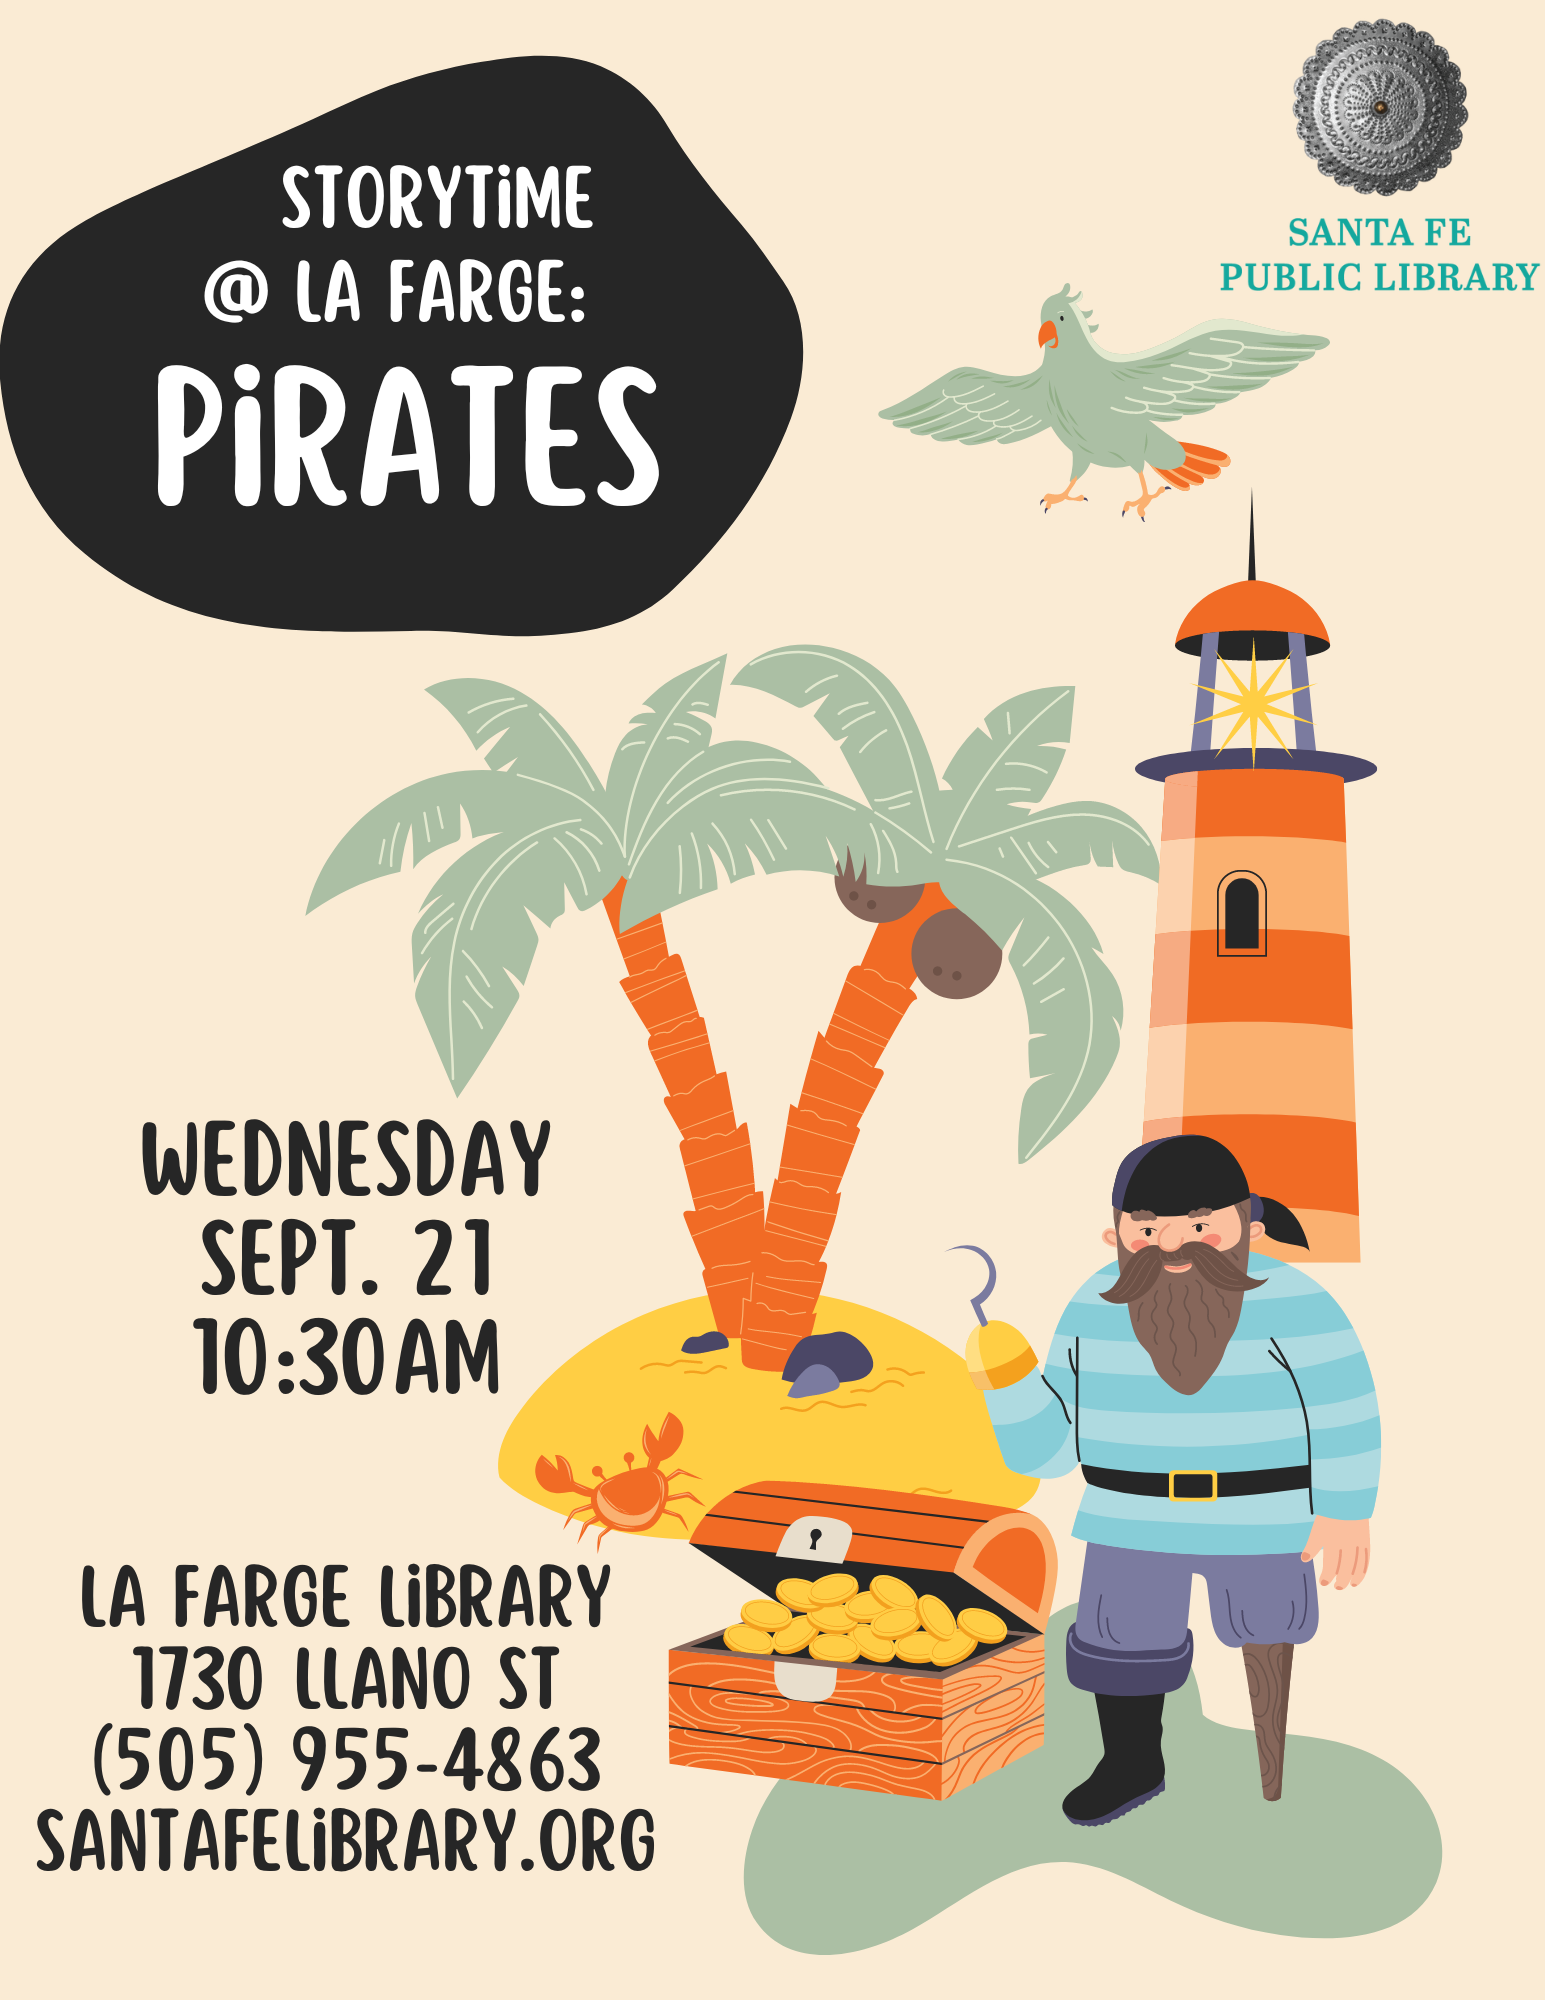 Pirate Storytime and Craft at La Farge Library